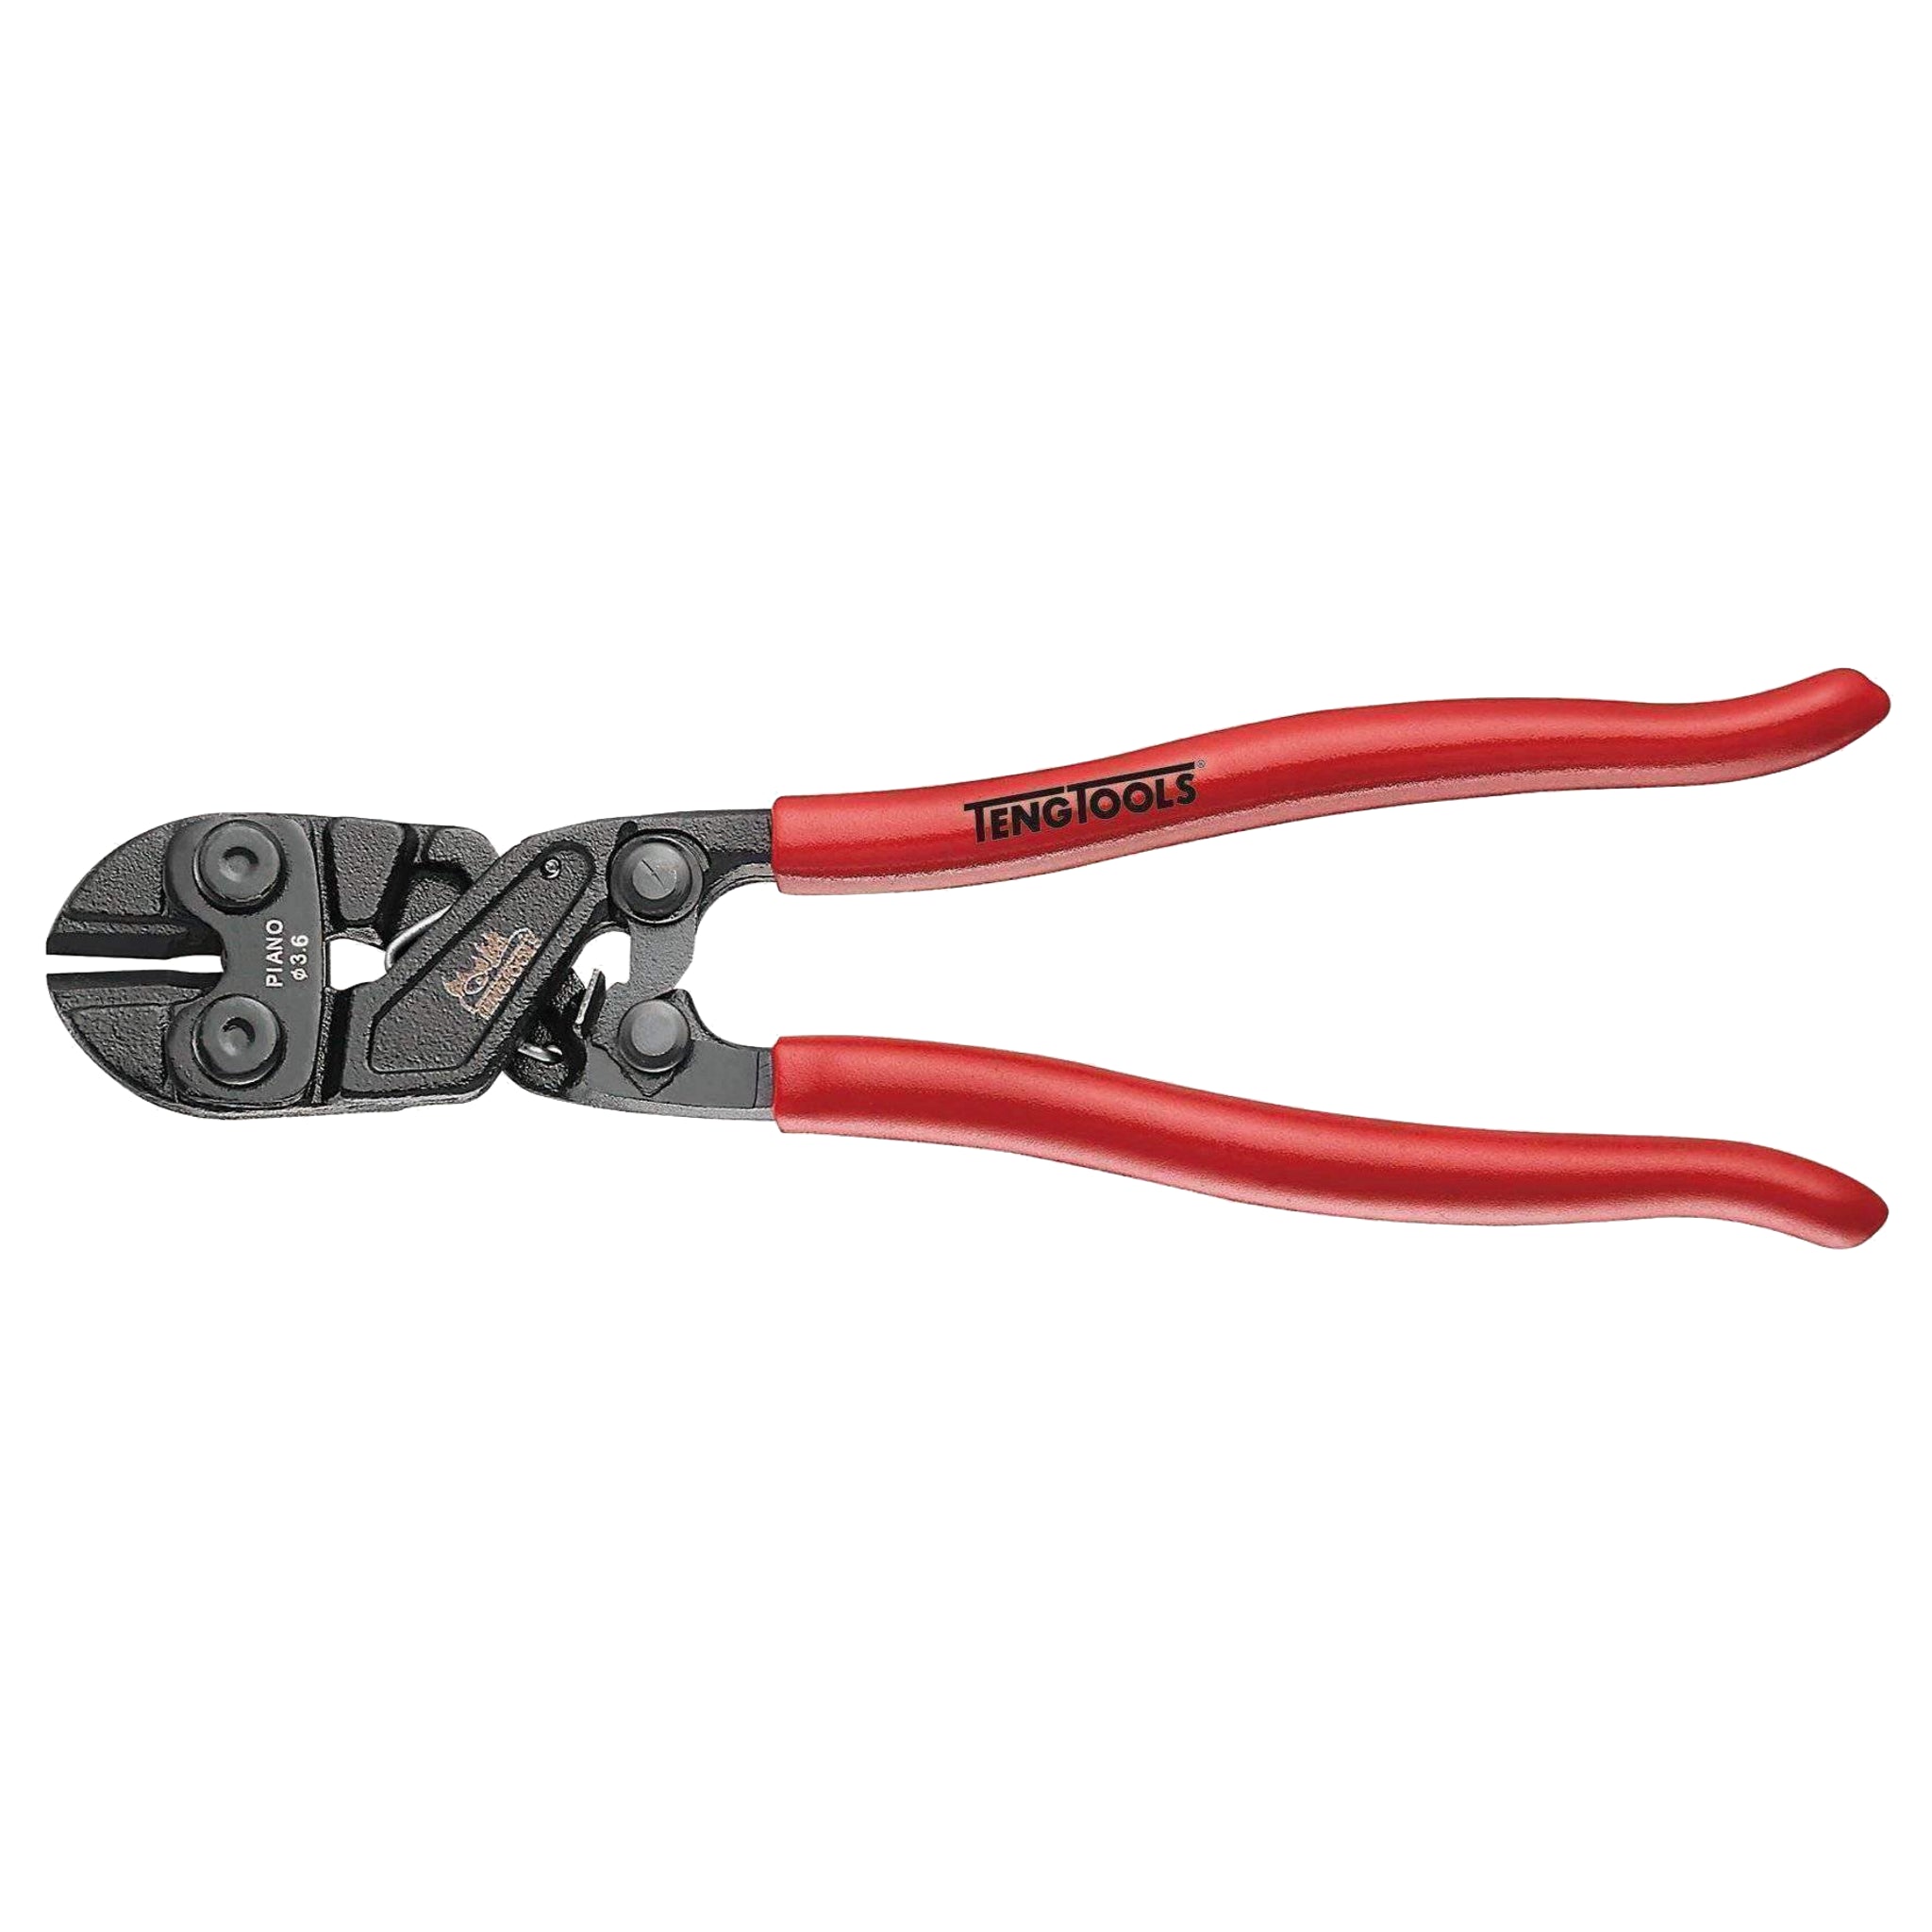 Teng Tools Bolt Cutters With Dipped Handle 8 To 36 Inches - 24 Inch